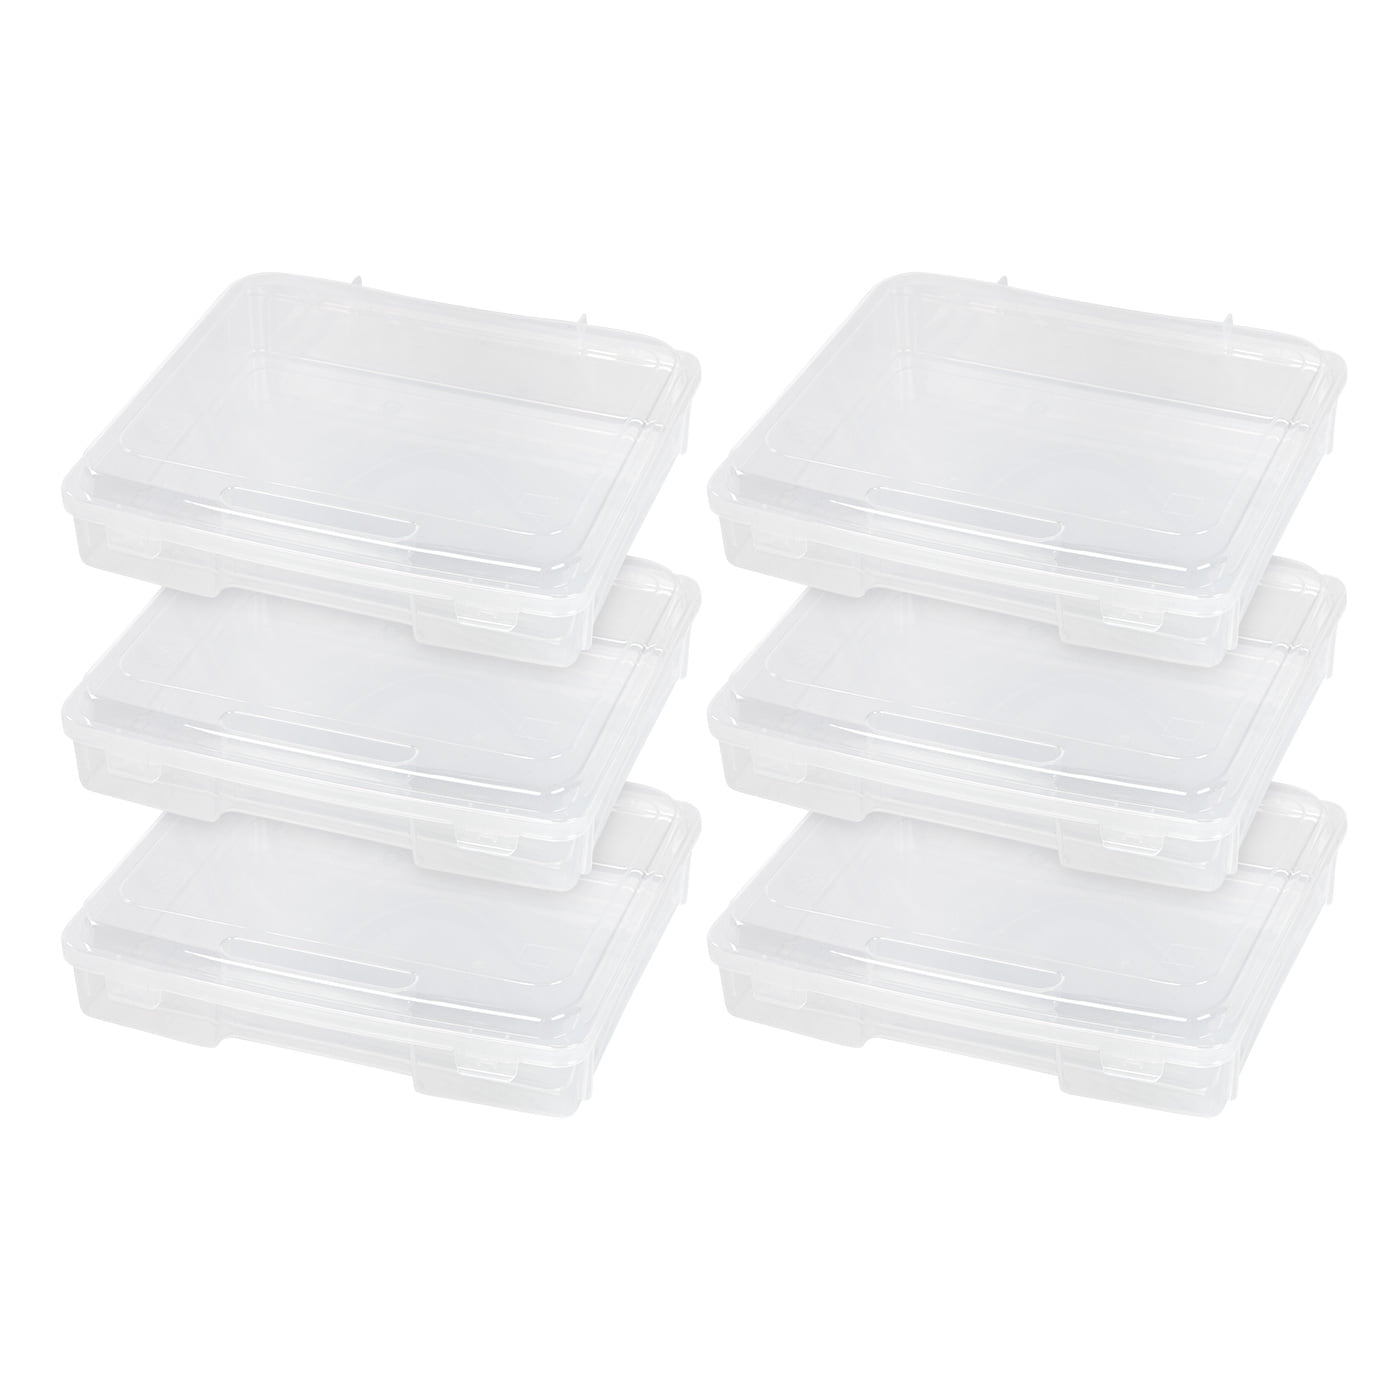 IRIS USA 10Pack 8.5 x 11 Portable Project Case Container with Snap-Tight  Latch, Clear, 10 Units - Harris Teeter